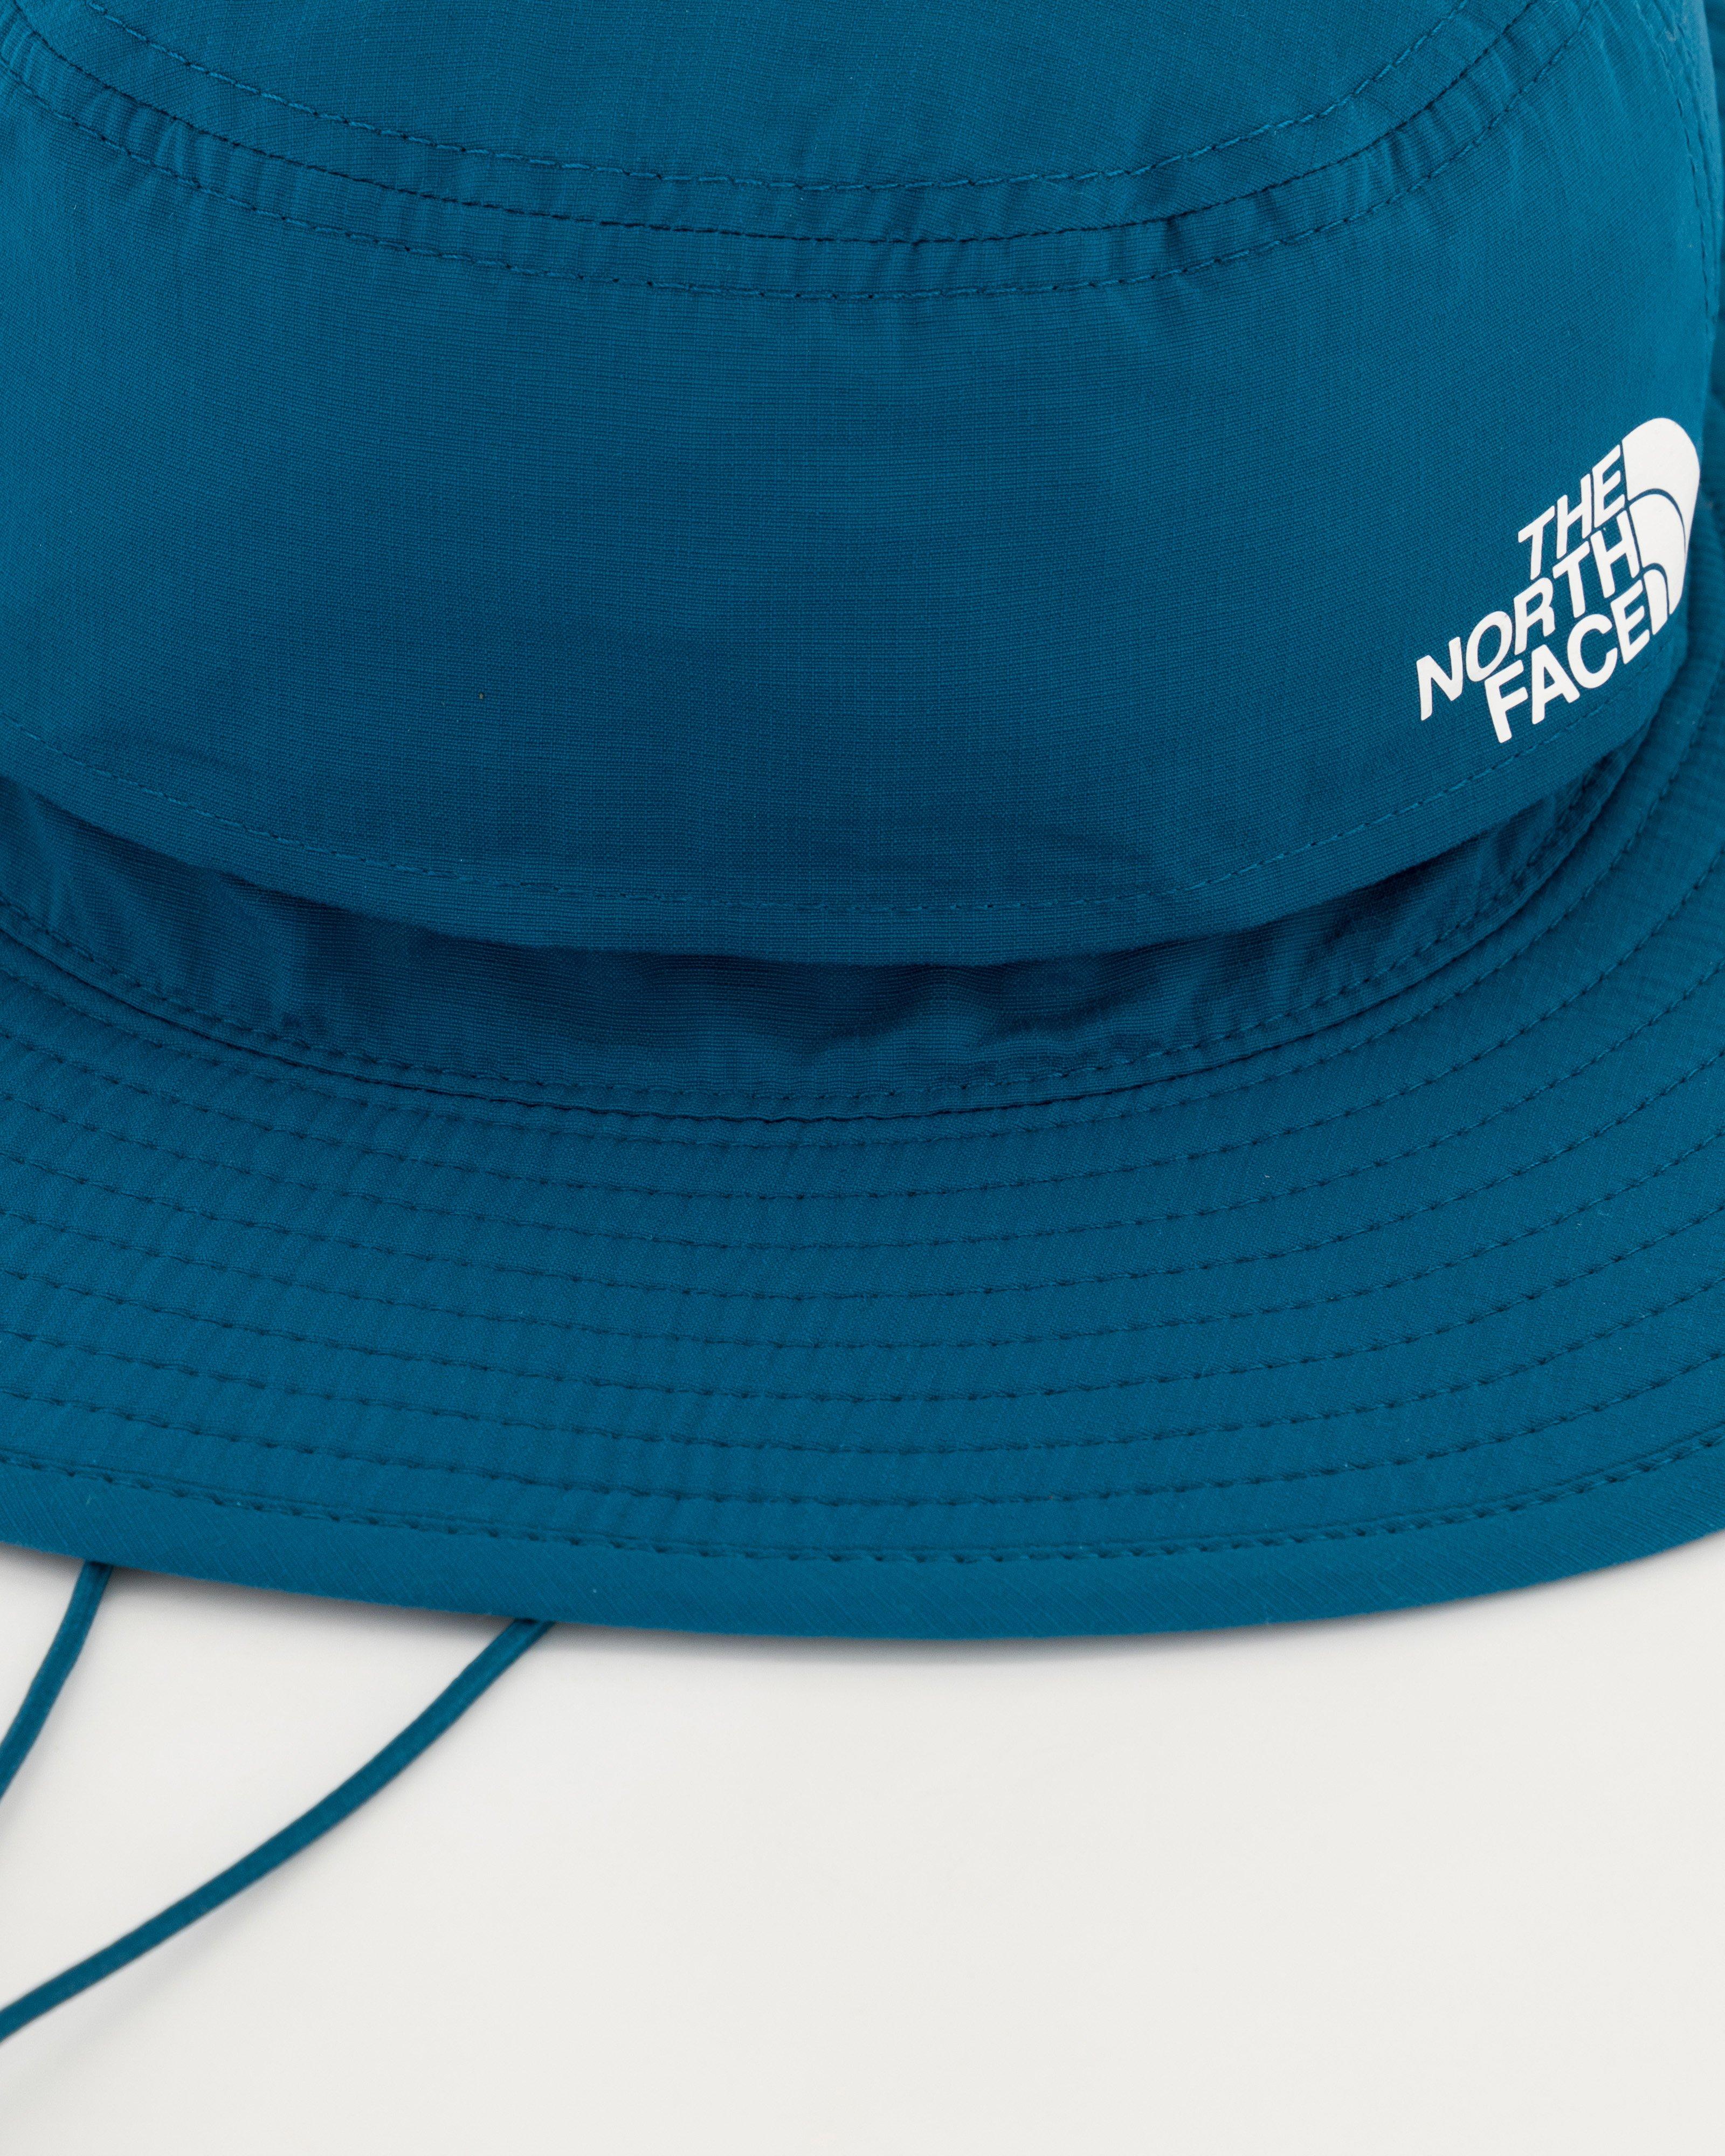 The North Face Horizon Breeze Brimmer Hat -  Blue